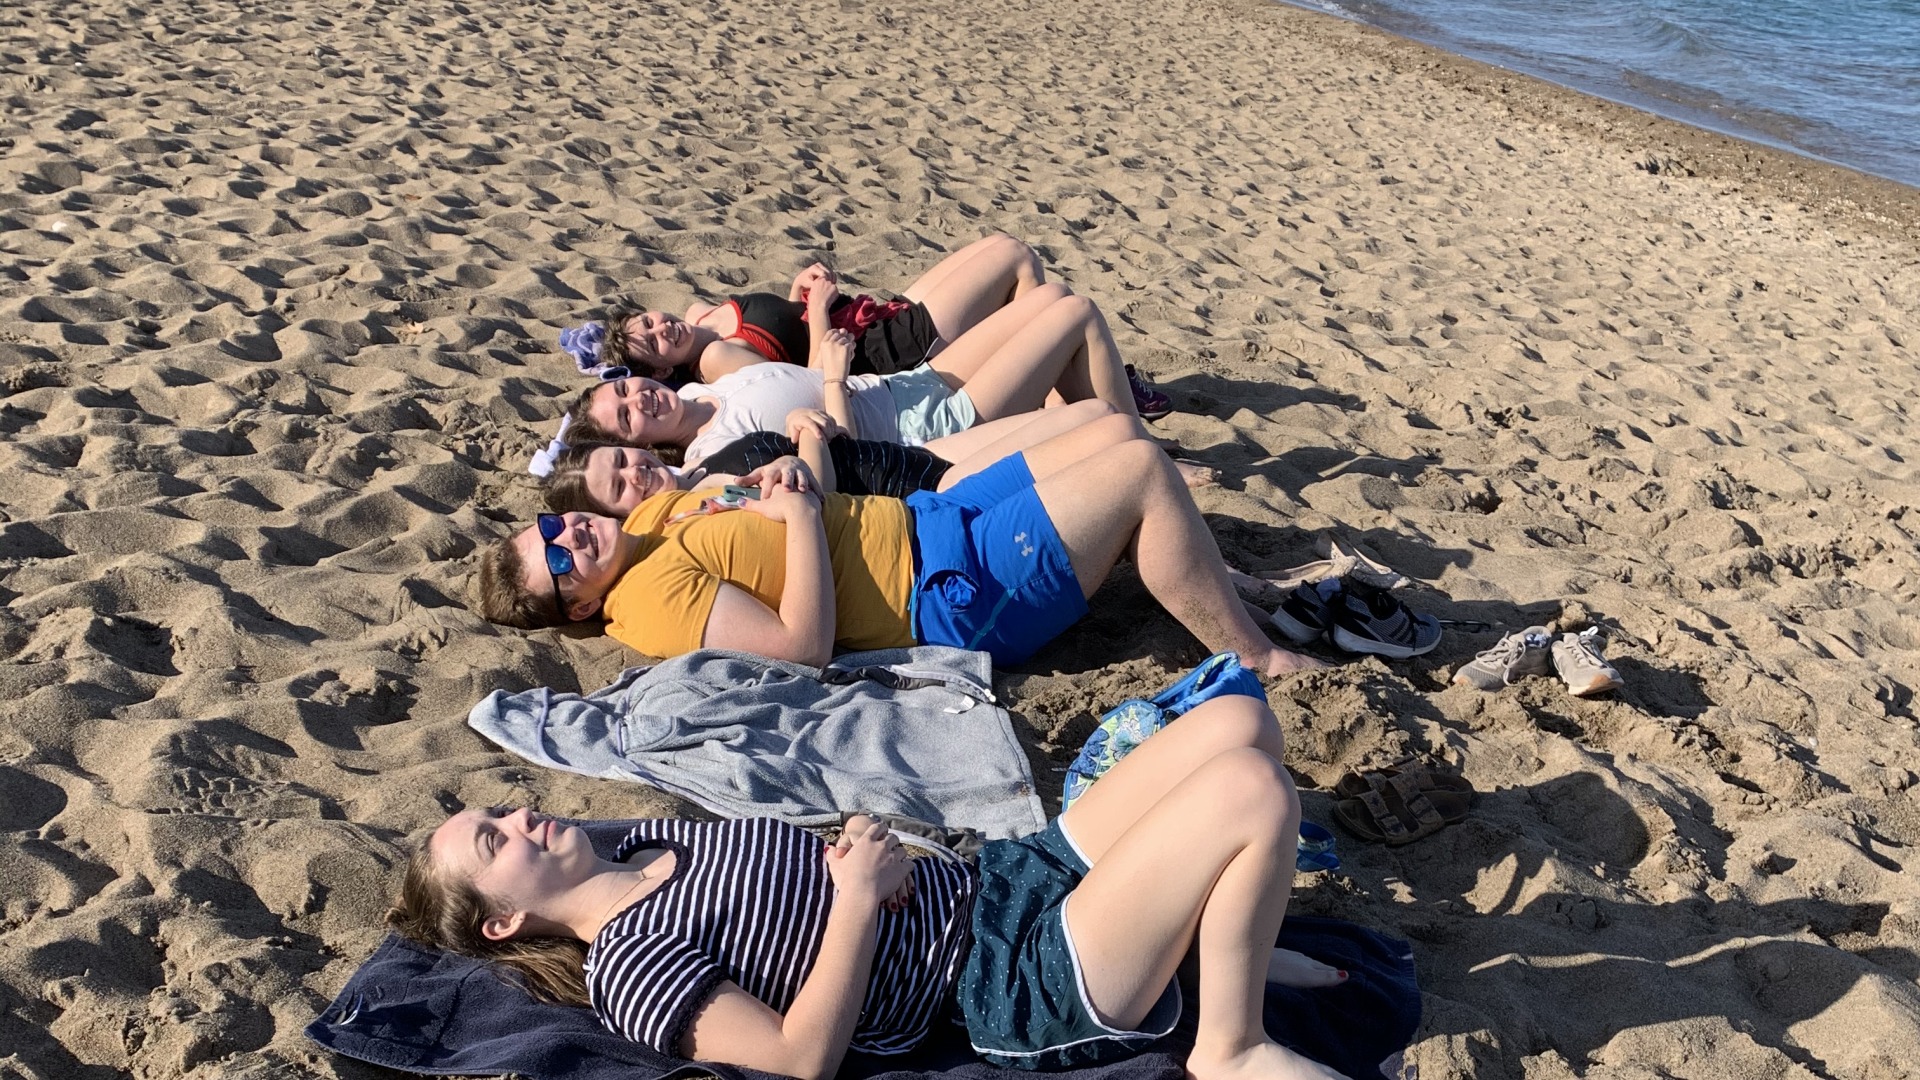 Me and my friends relaxing under the sun